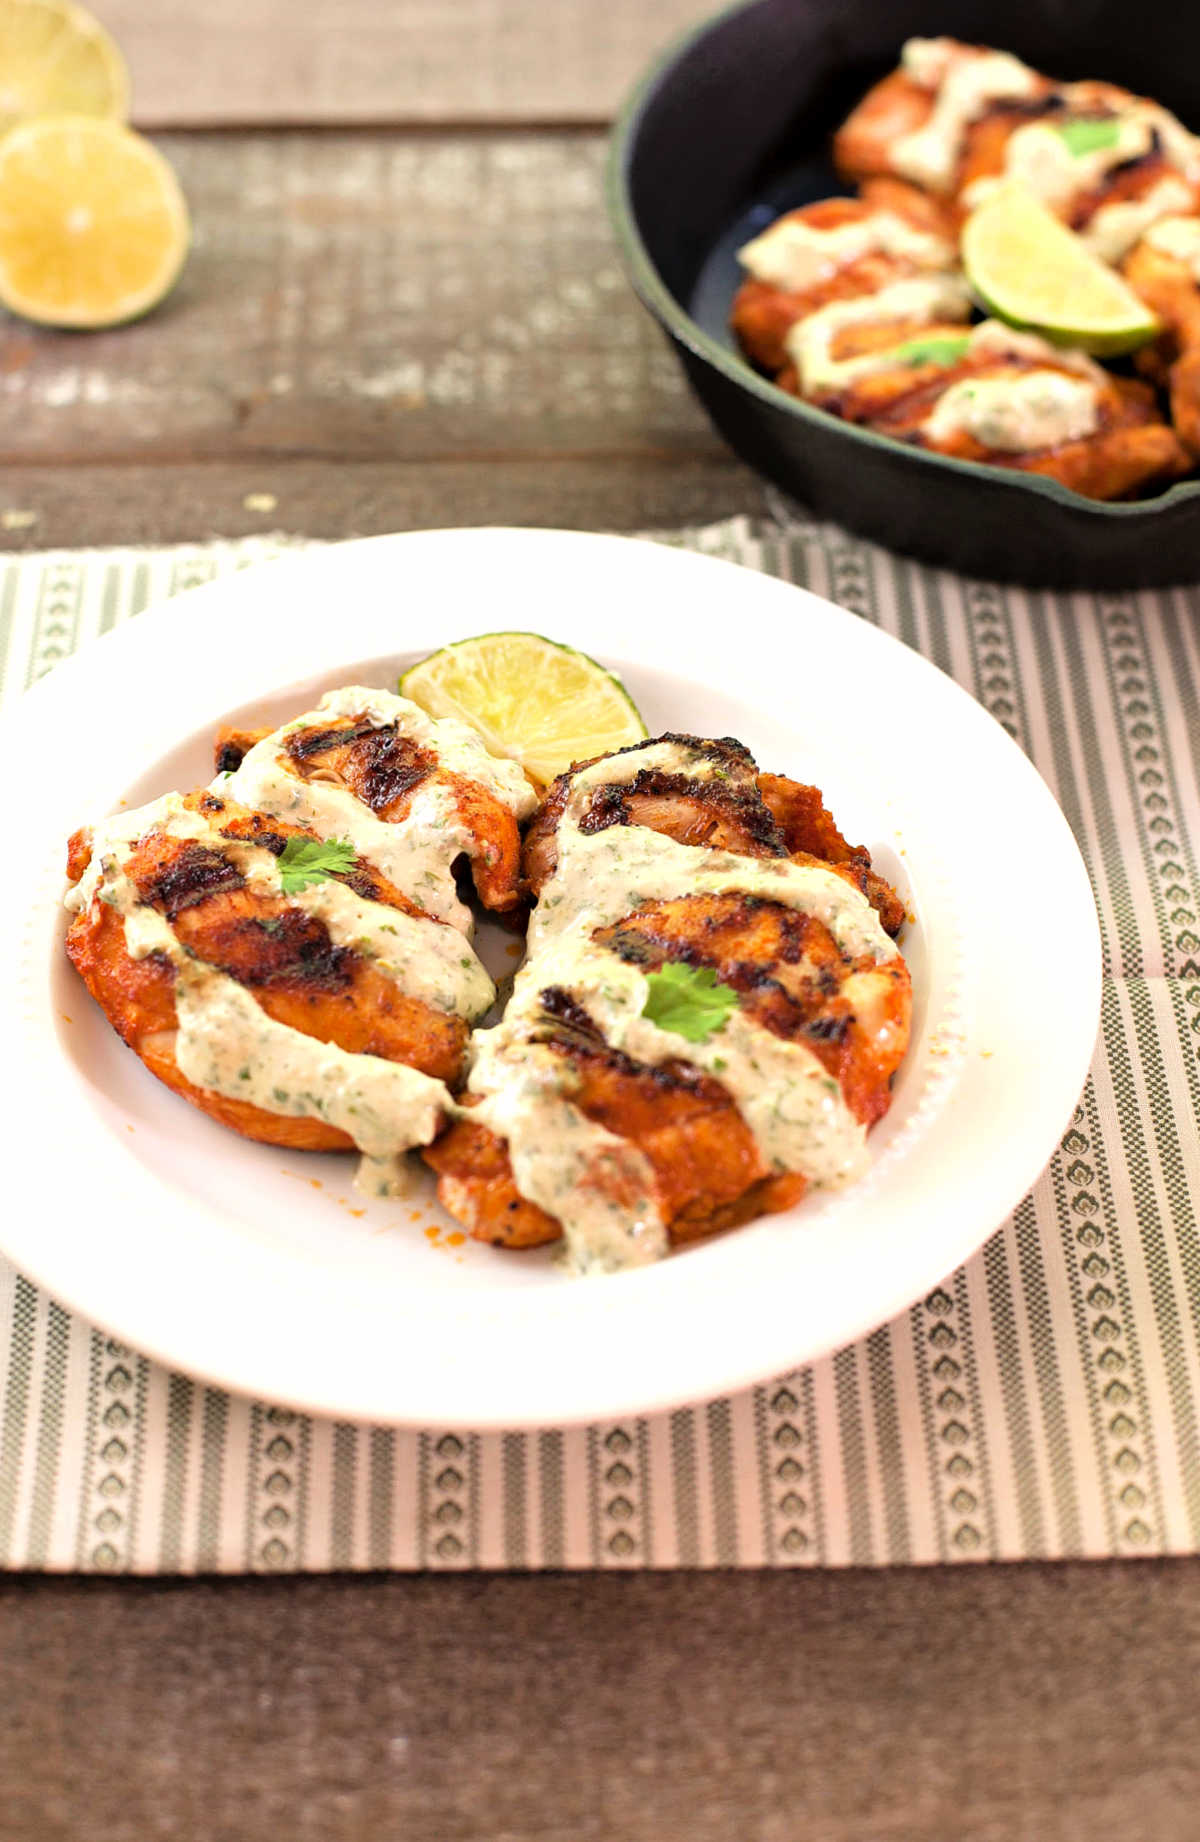 Chili Lime Cream Grilled Chicken